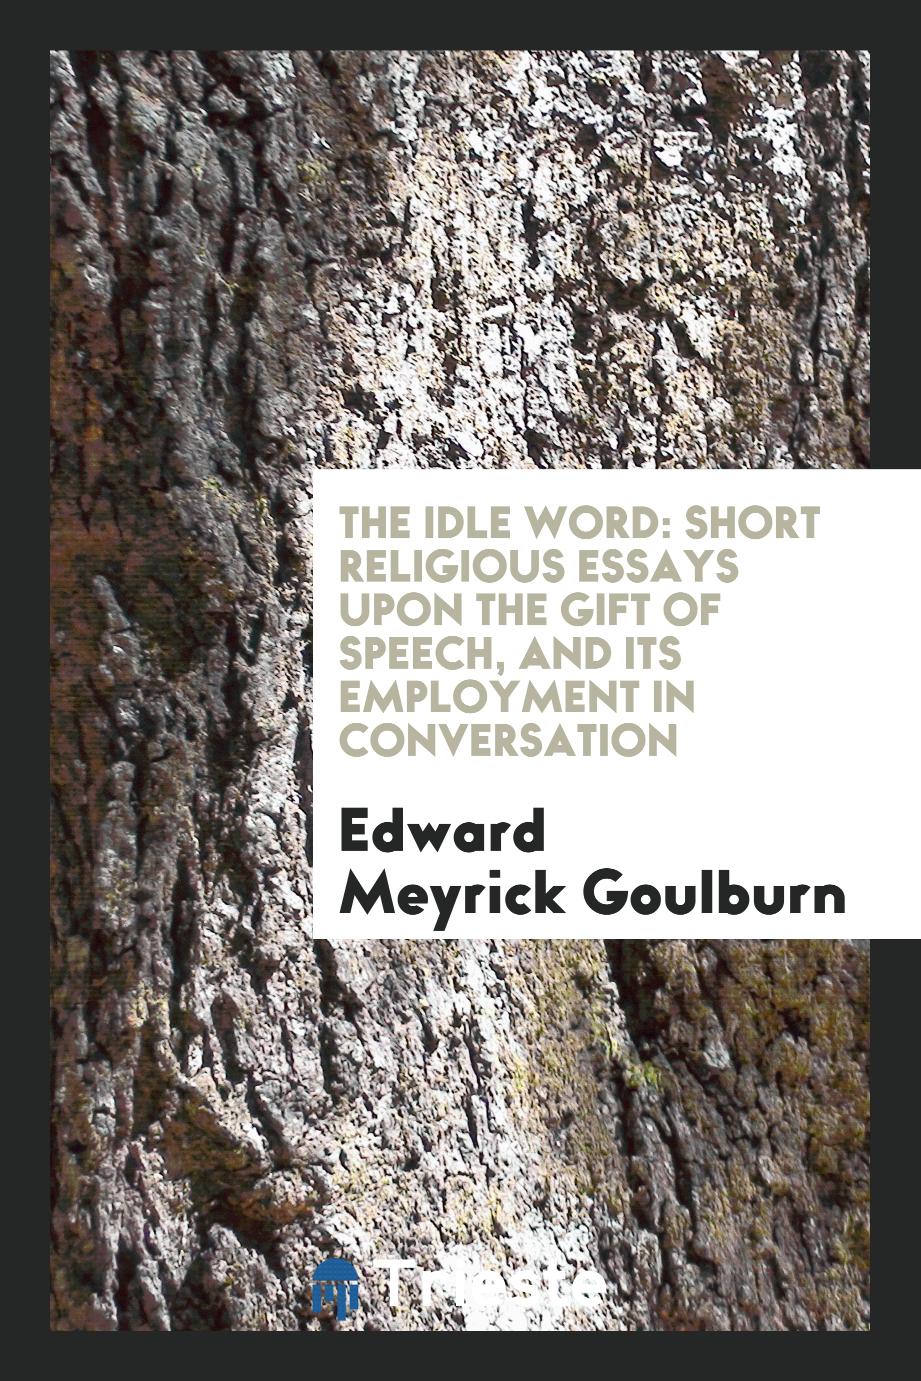 The idle word: short religious essays upon the gift of speech, and its employment in conversation